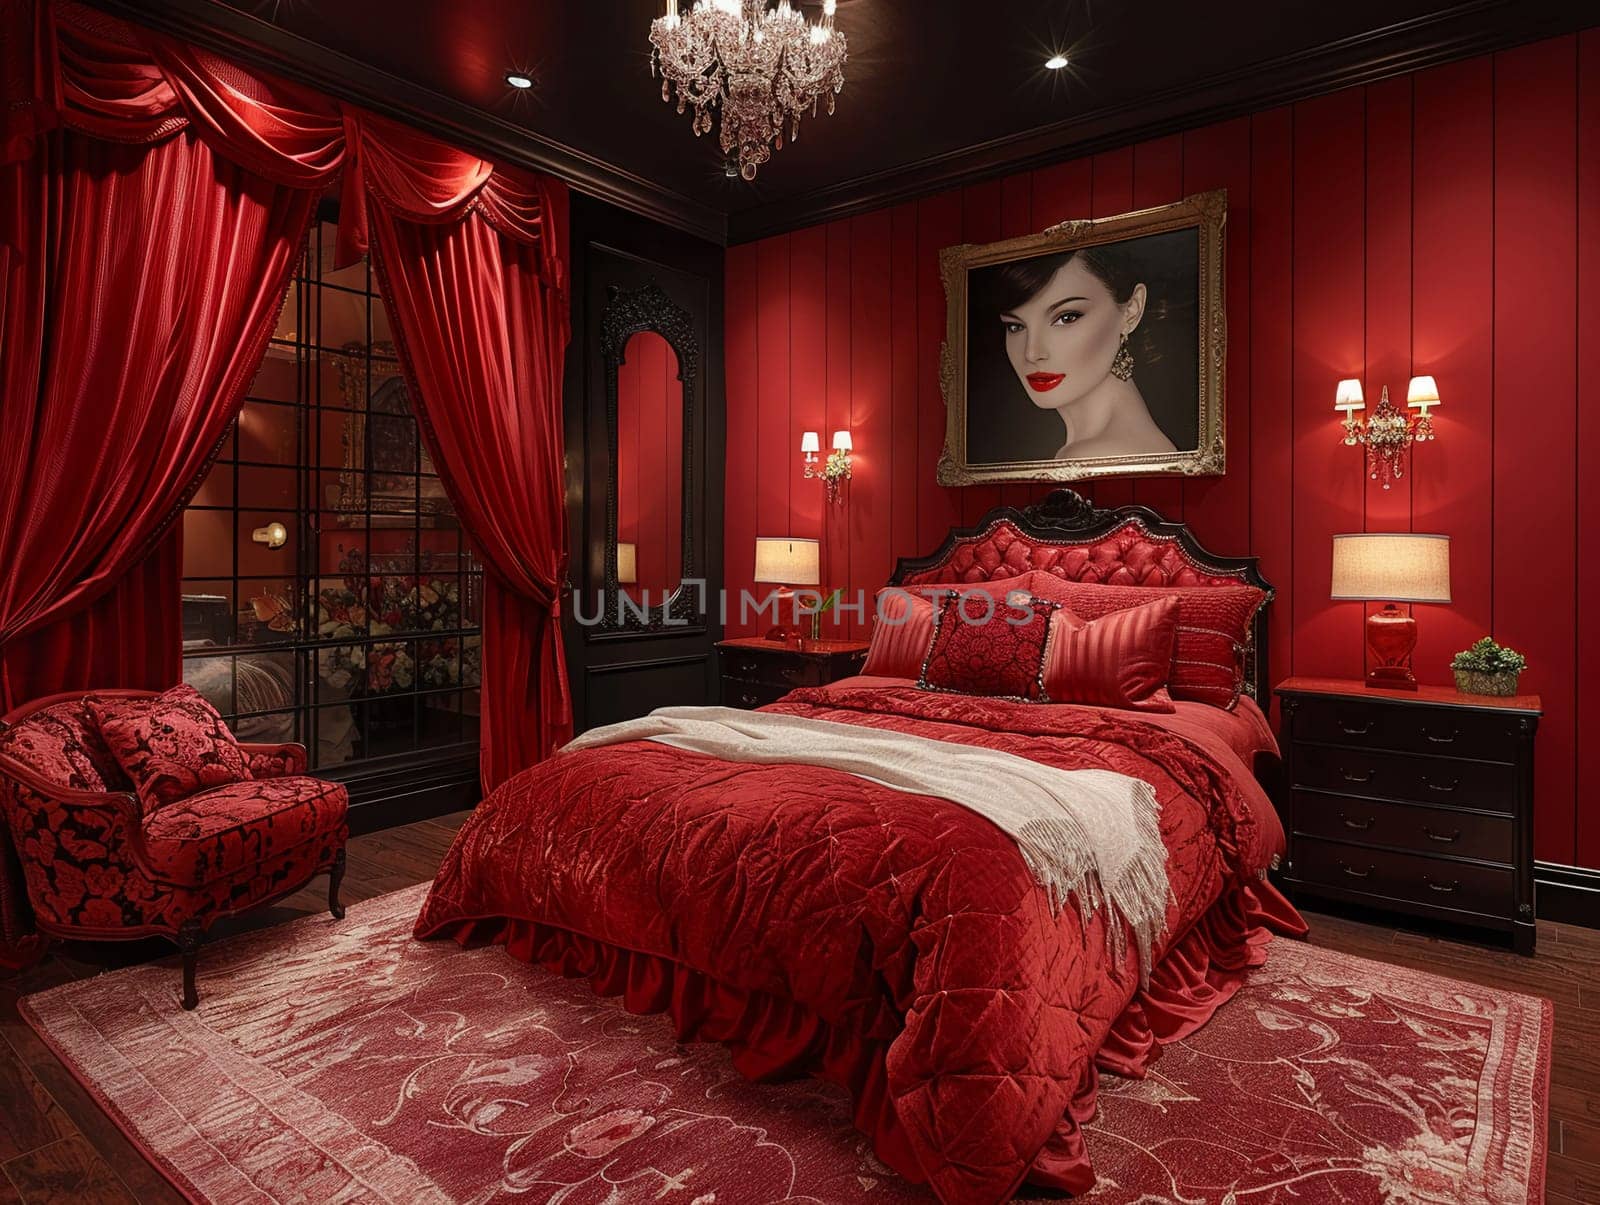 Old Hollywood glamour bedroom with satin drapes and vintage portraitsHyperrealistic by Benzoix